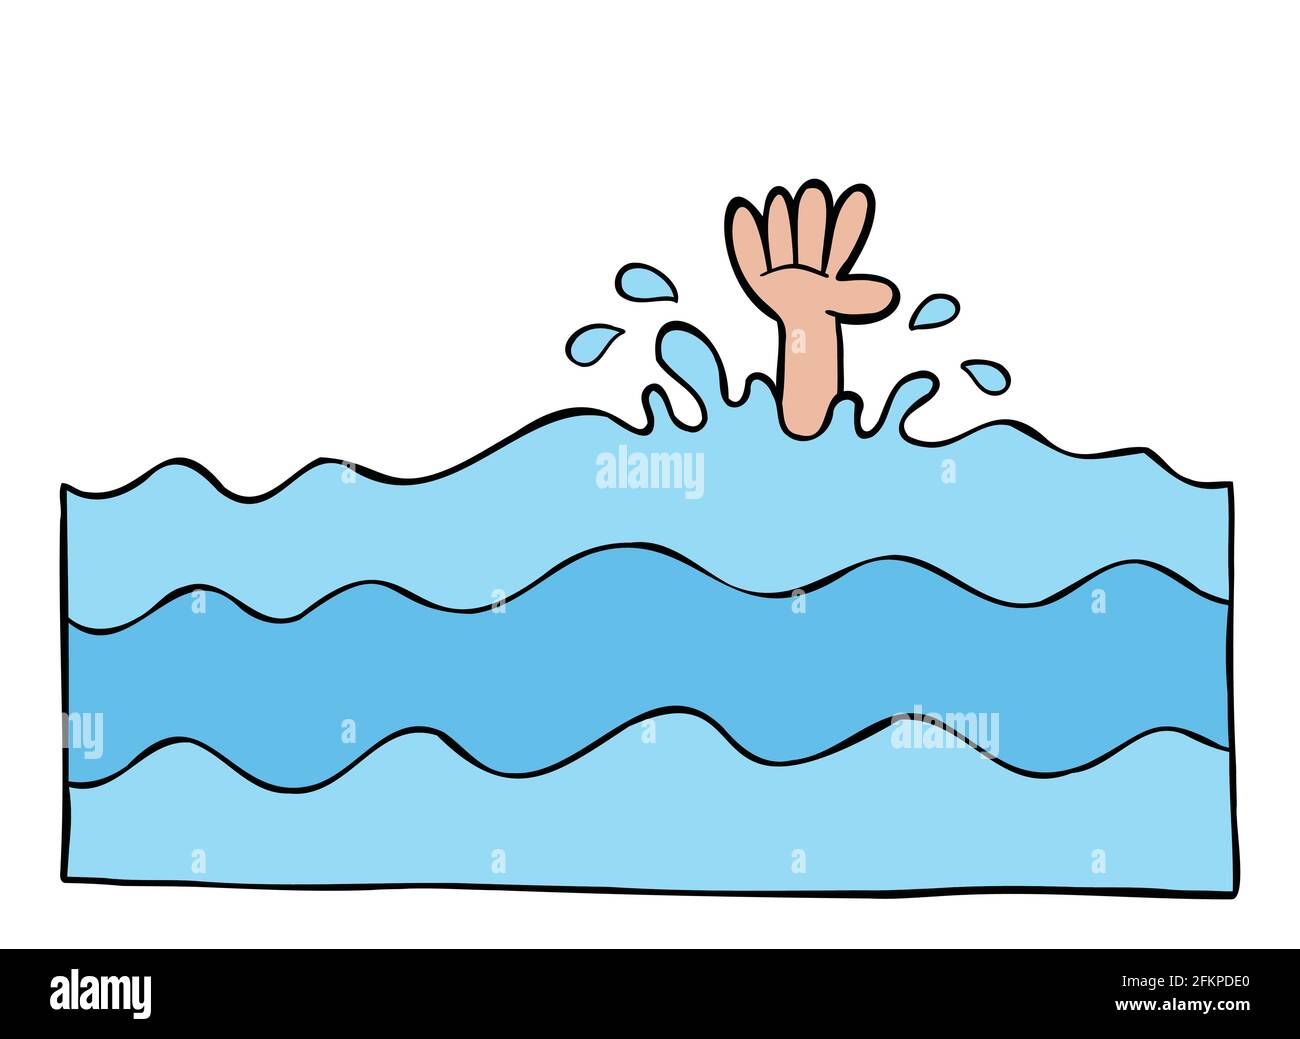 Cartoon vector illustration of the man and his hand drowning in the sea. Stock Vector